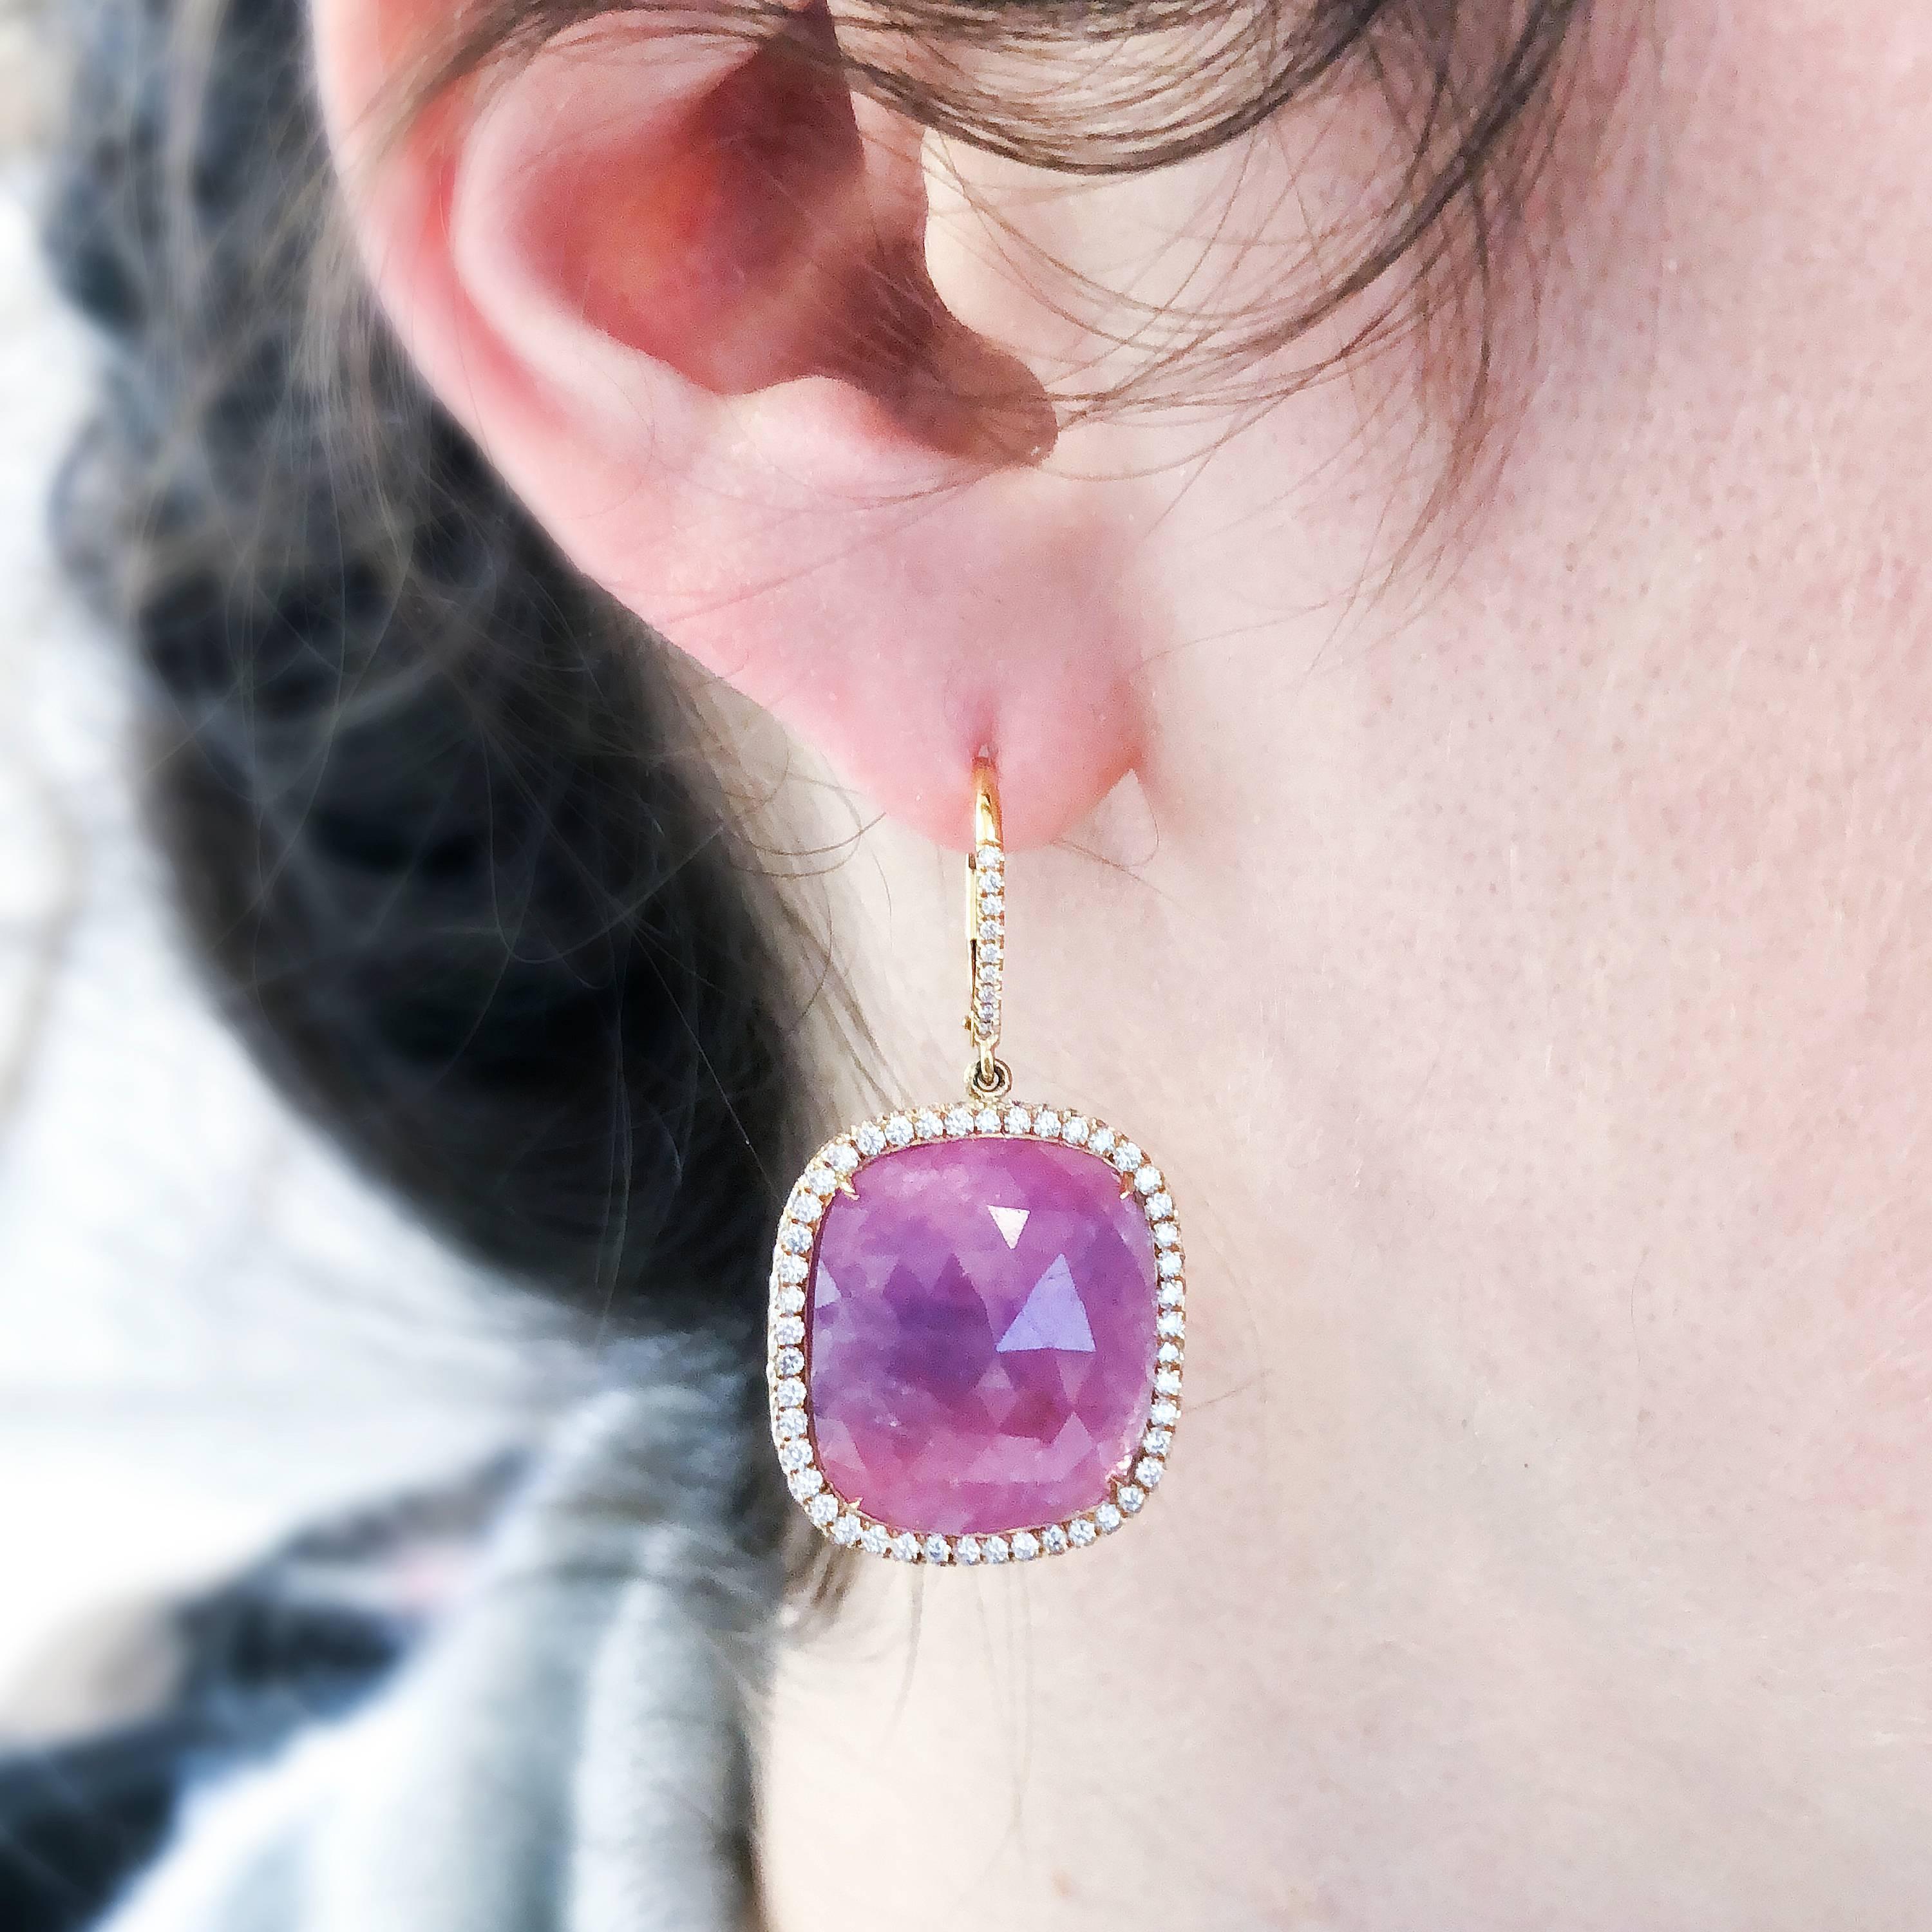 37.10 ctw cushion pink sapphire slices
1.43 tw round diamonds on halos and leverbacks (190 stones)
18k rose gold colored stone dangle earrings
statement earrings